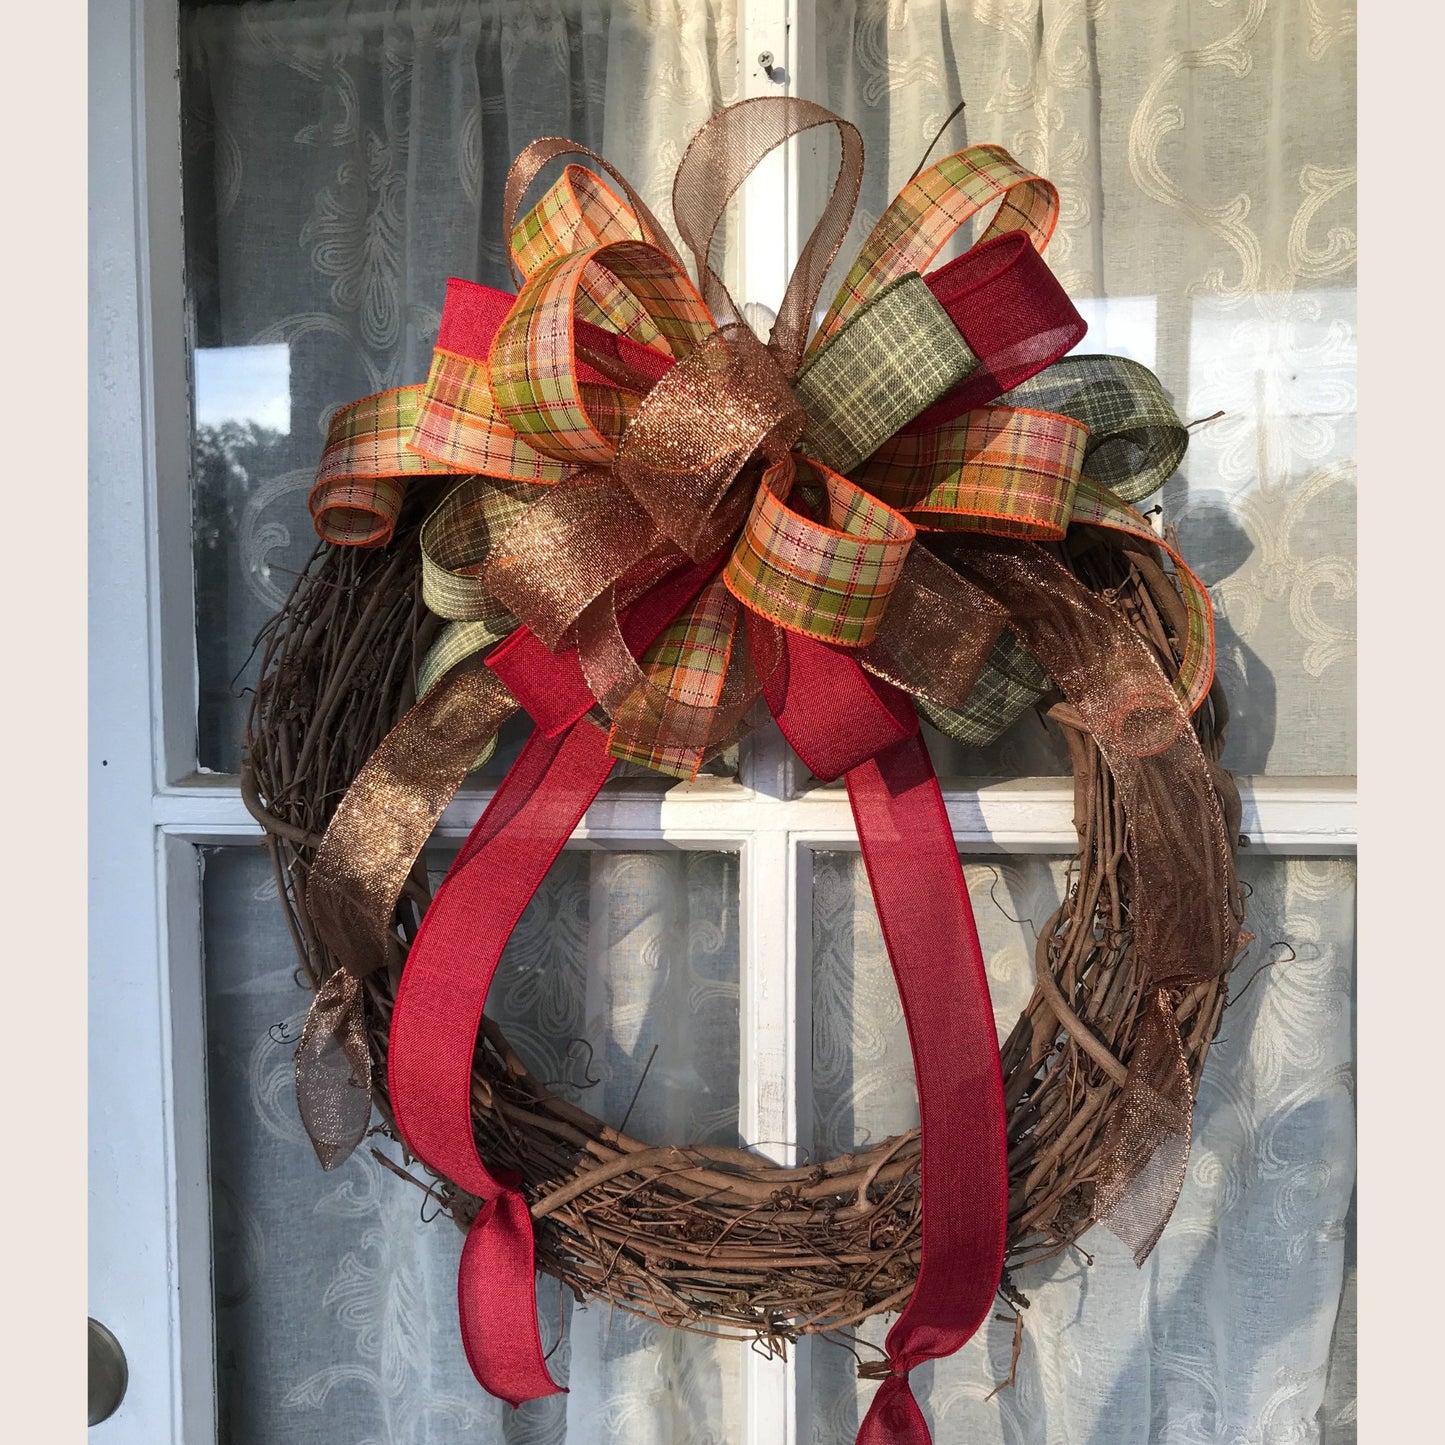 Fall bow, Fall Blend Bow, Fall Decorations for front door, Wreath bow for fall